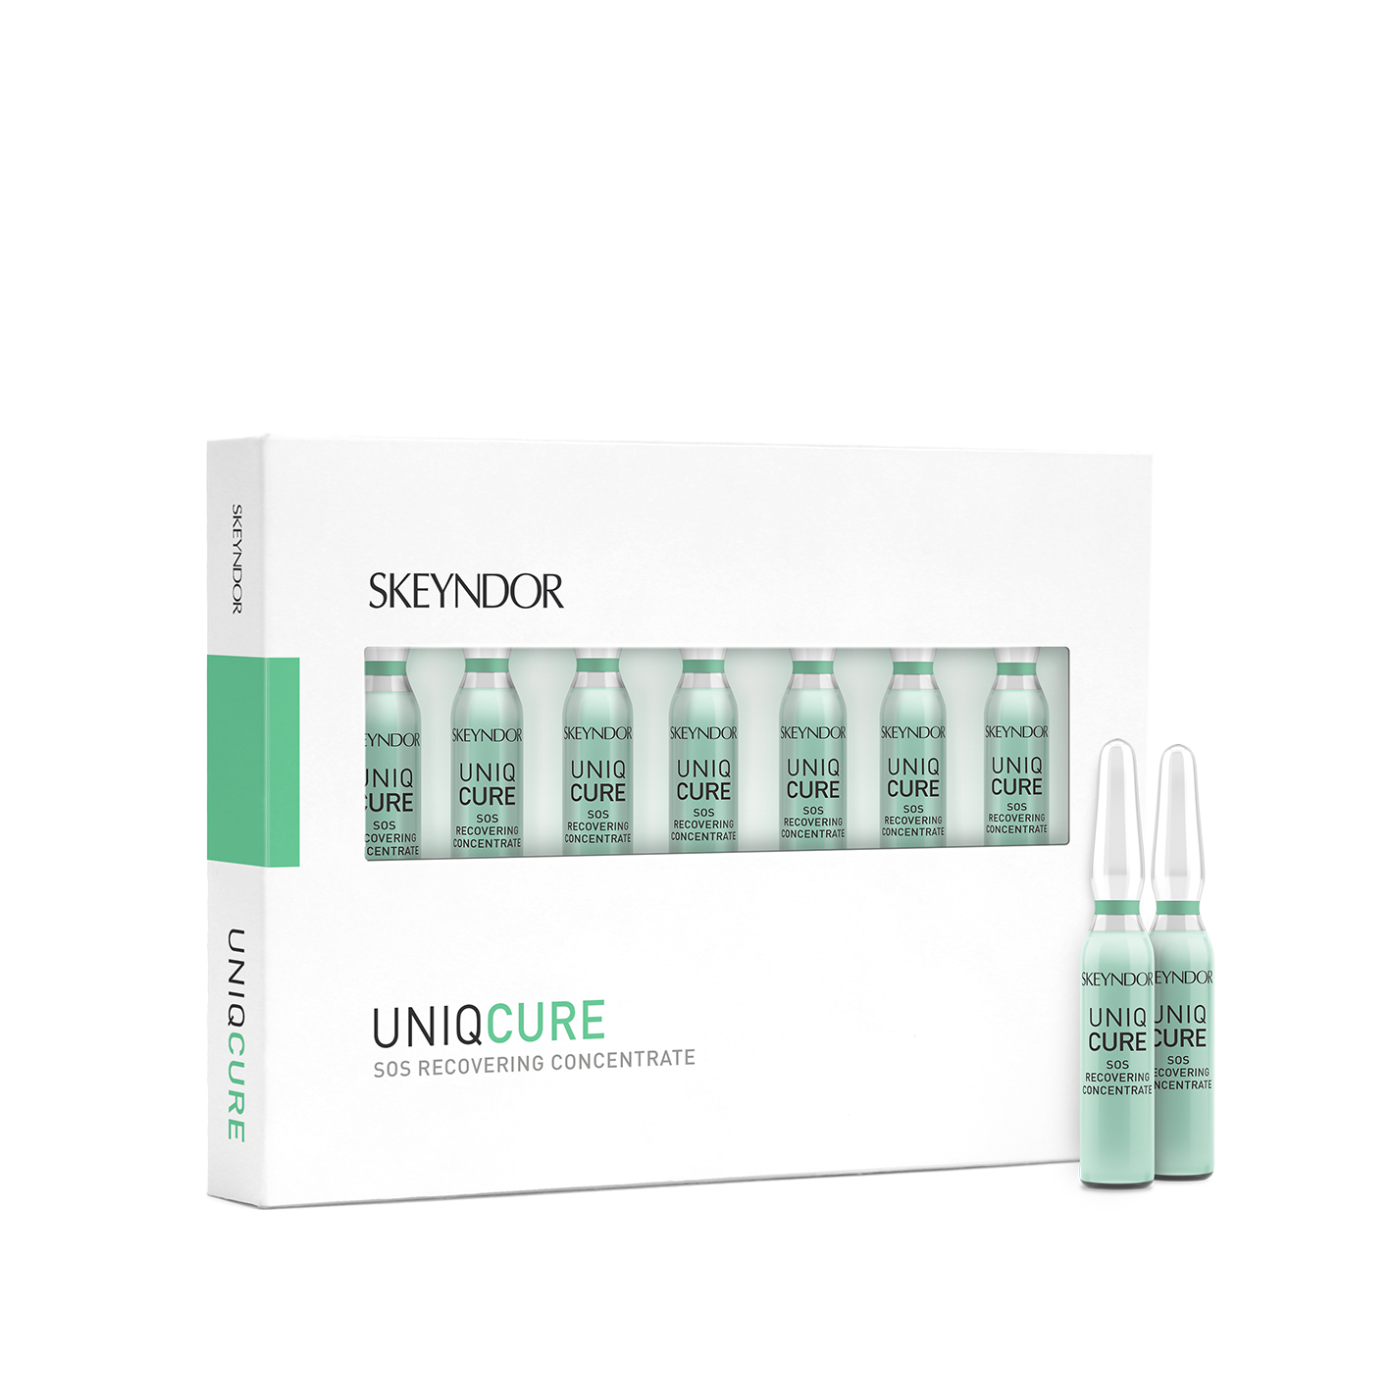 Uniqcure SOS Recovering Concentrate